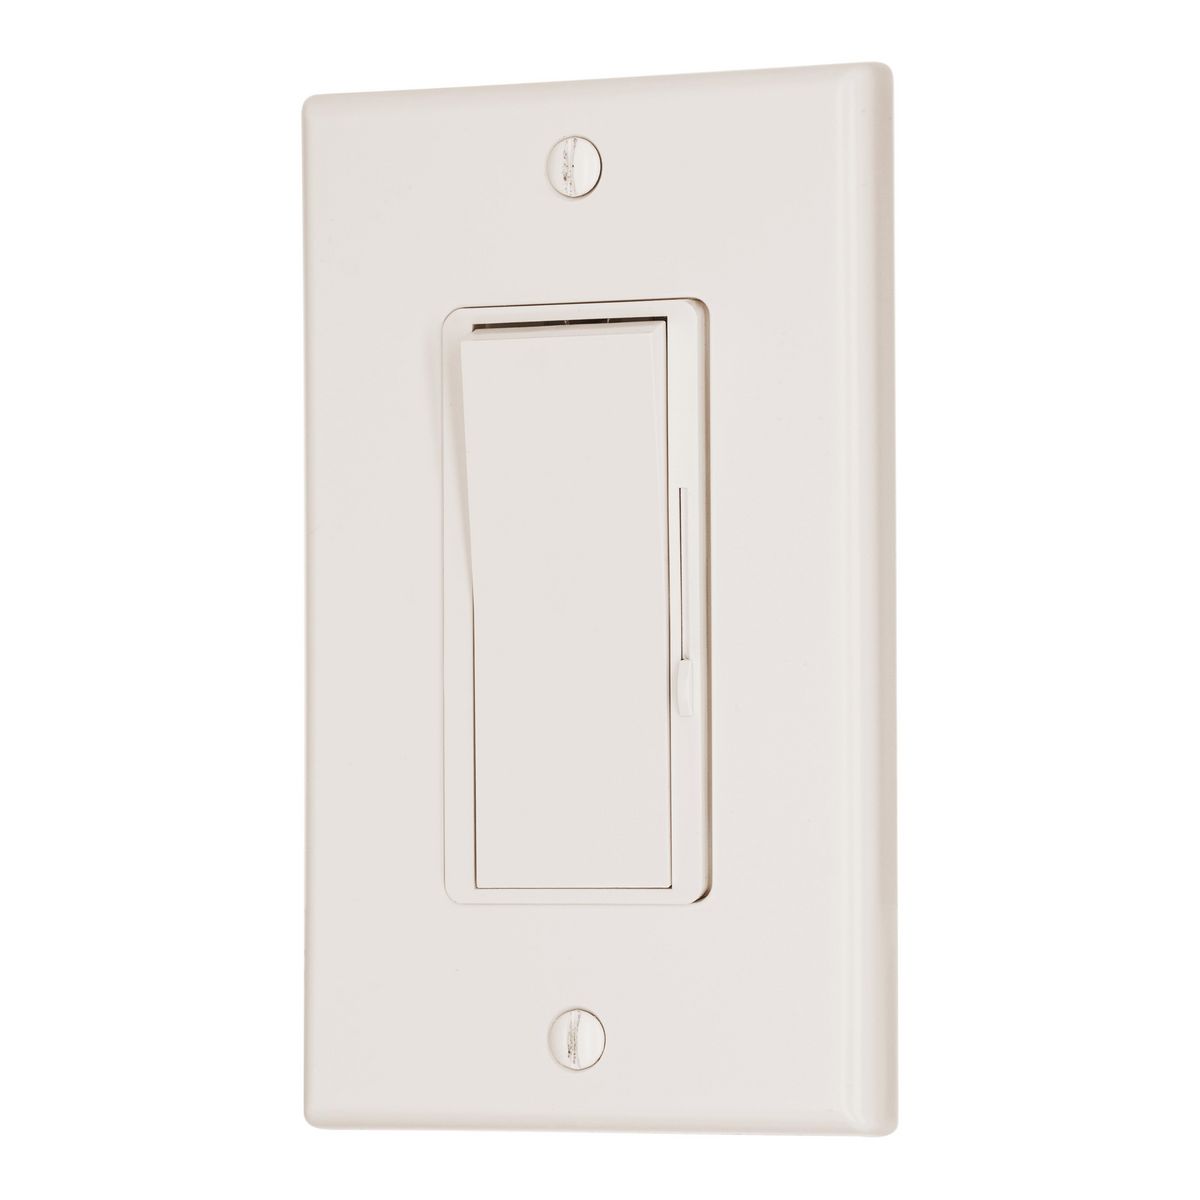 Dimmer Switch, 0-10V DC Low Voltage Single-Pole or 3-Way Dimmable  LED/CFL/Incandescent/Halogen, Wall Plate